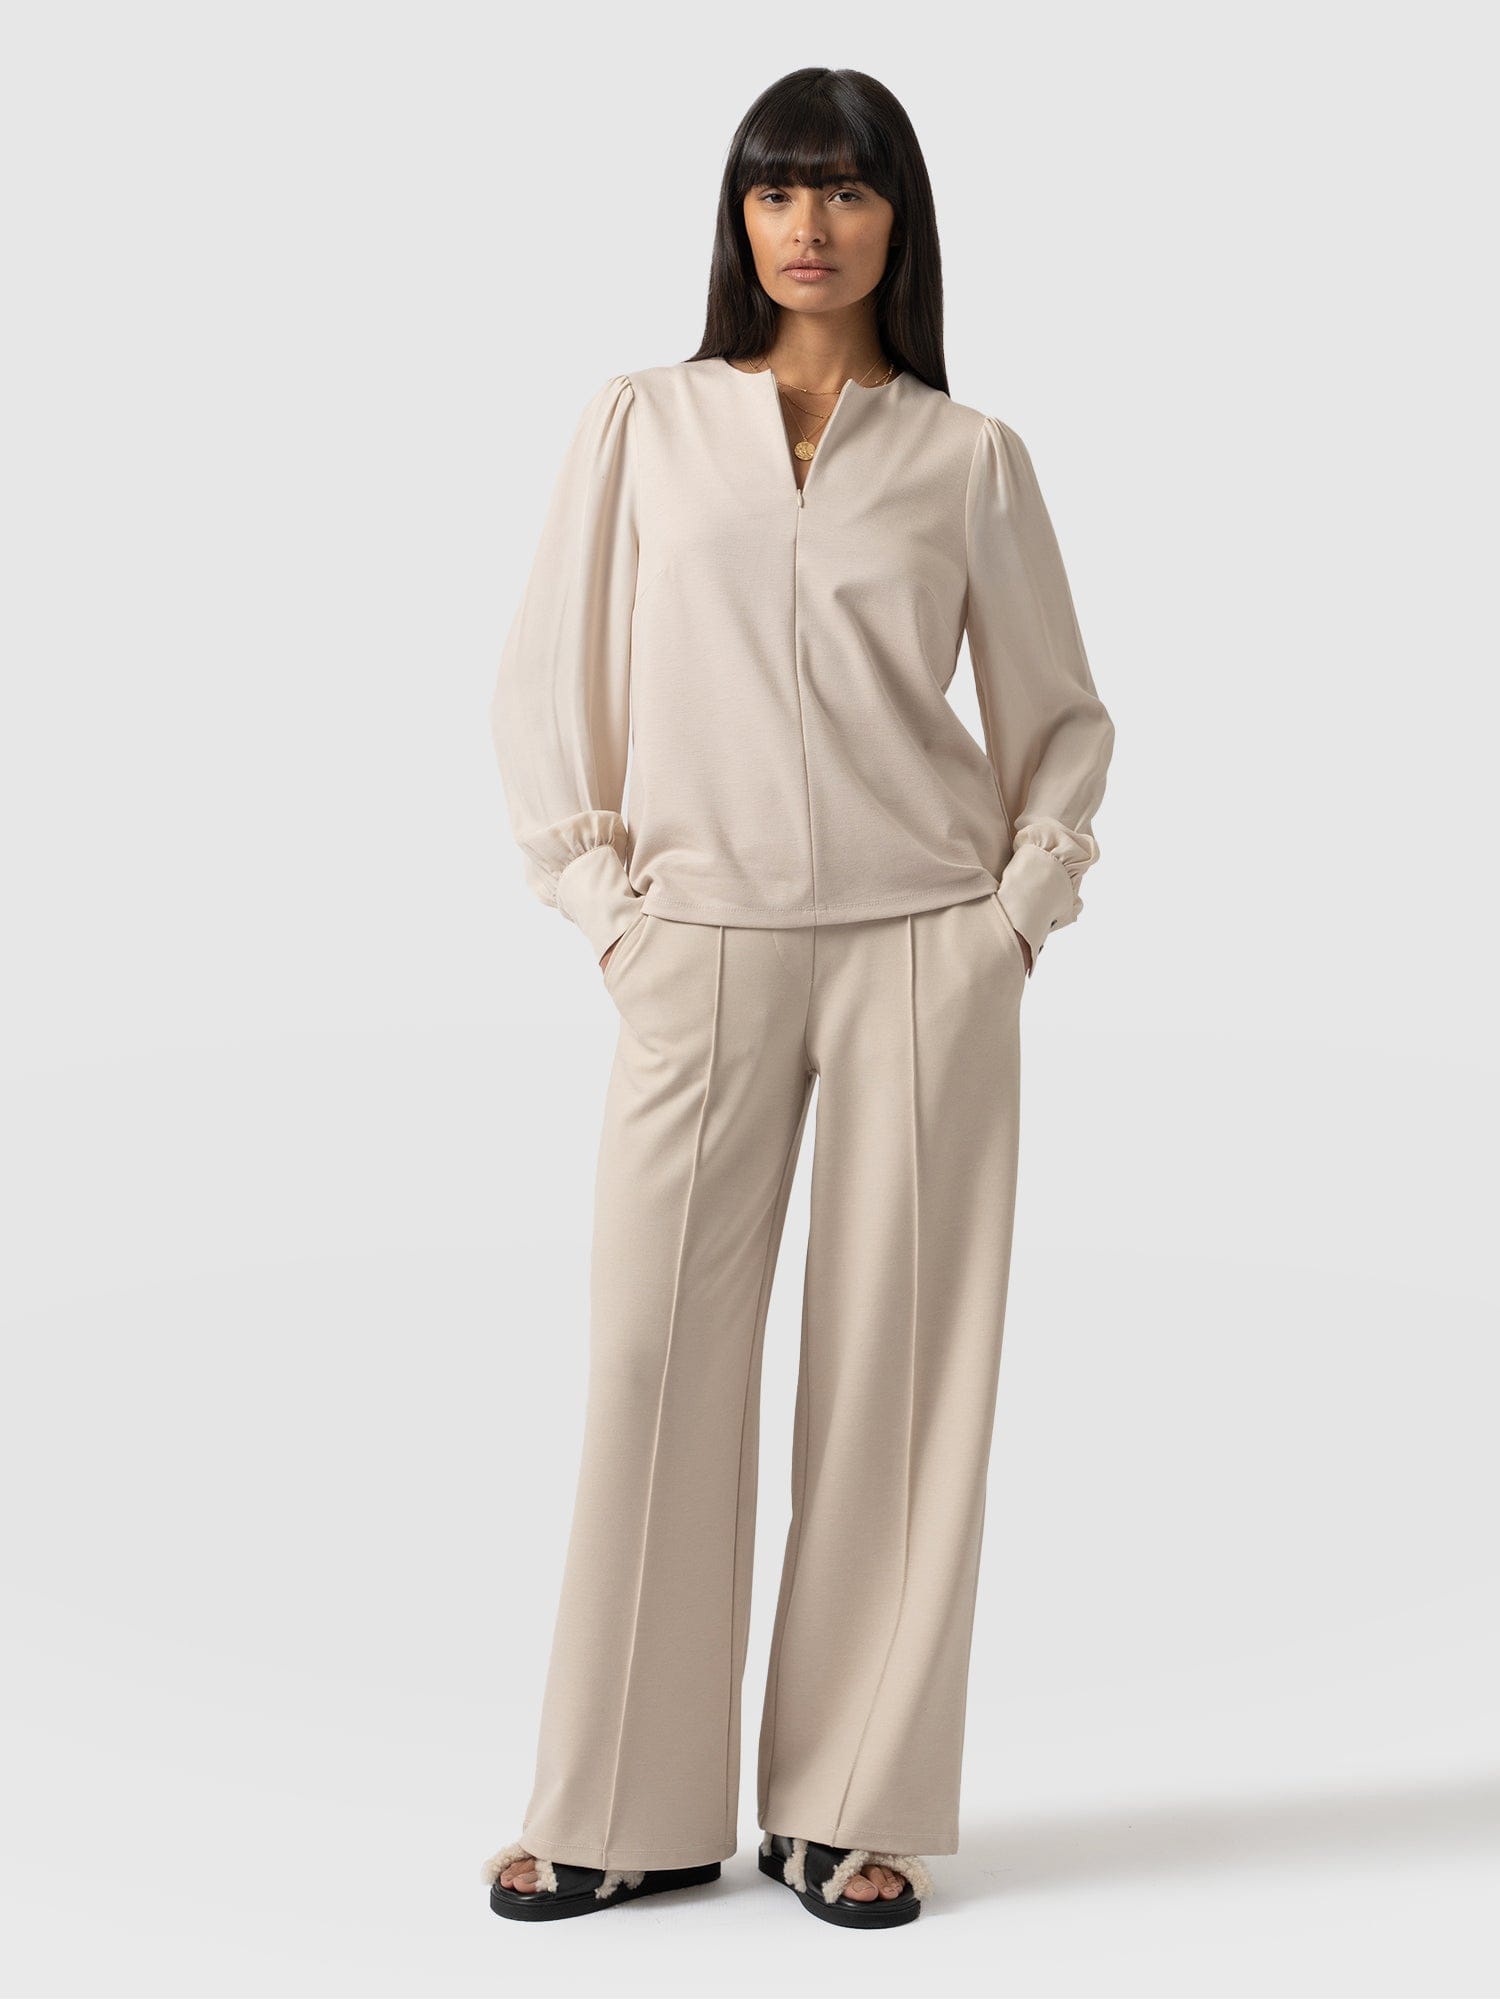 2 Way Stretch Elasticated Trousers - Stretch fit comfort.